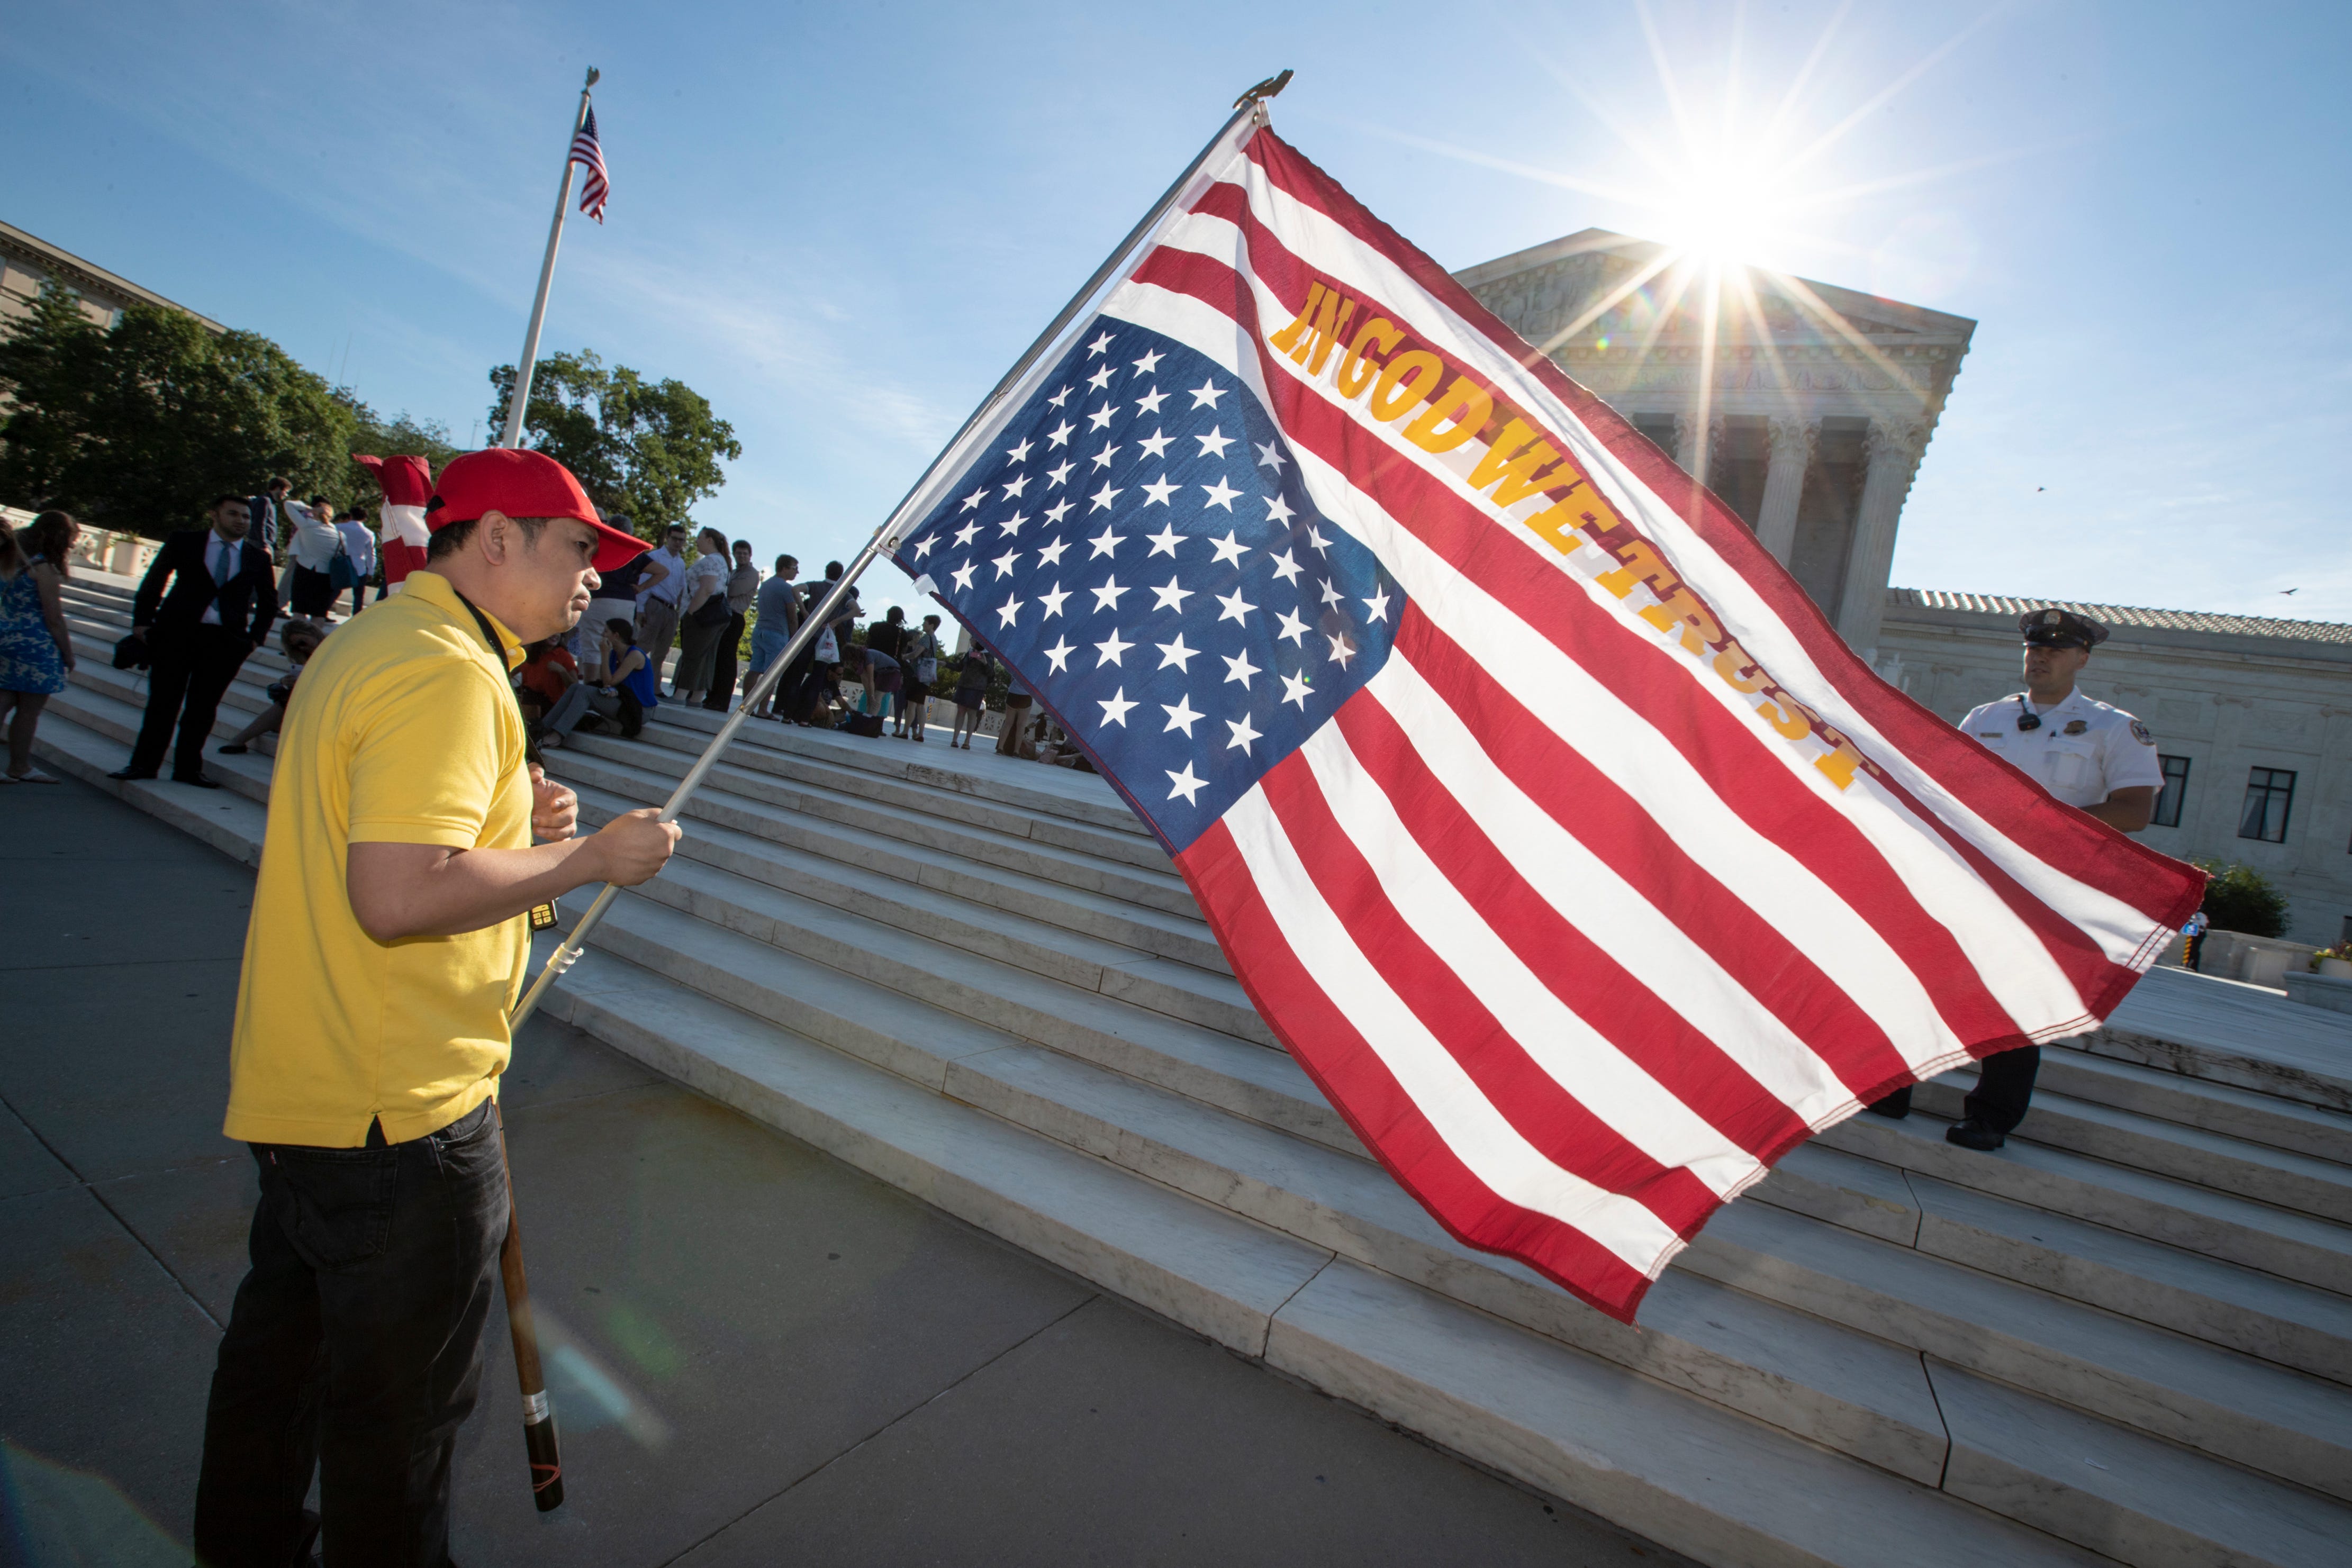 Penny Vu of Falls Church, Va., who immigrated to the United States from Vietnam 22 years ago, waves fa lag as he demonstrates in front of the Supreme Court early June 25, 2018. The justices are expected to hand down decisions today as the court's ter